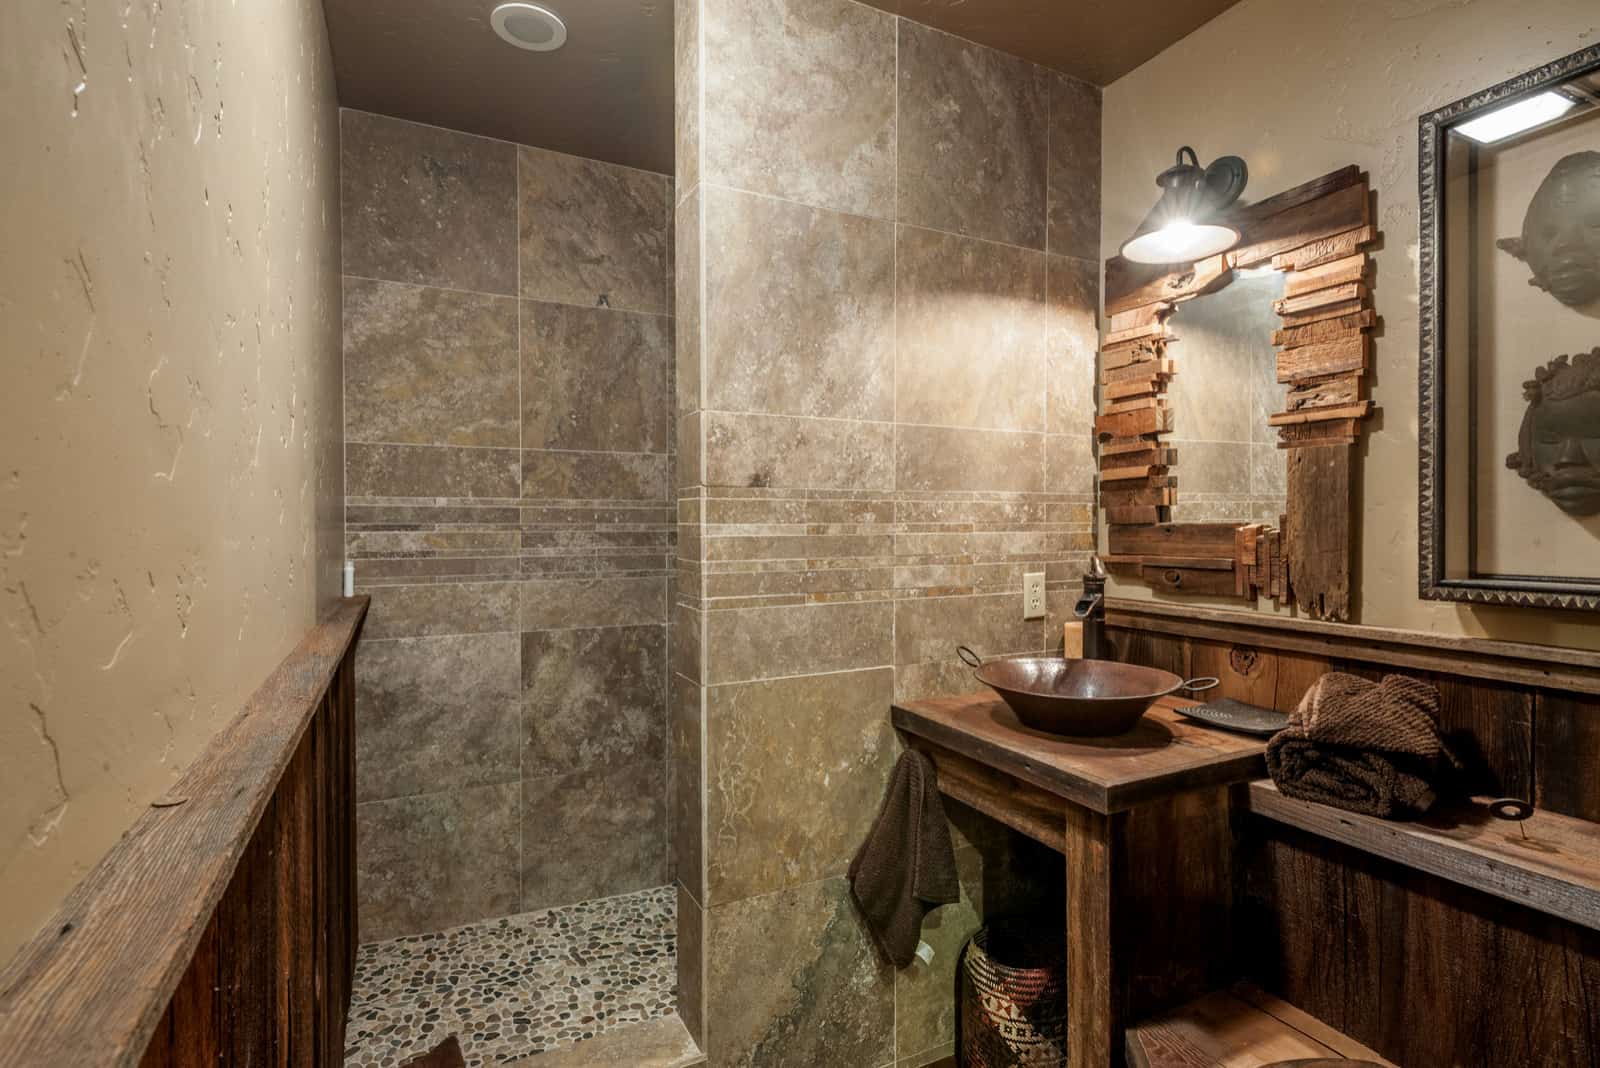 A Rustic Bathroom With A Hunter’s Trophy